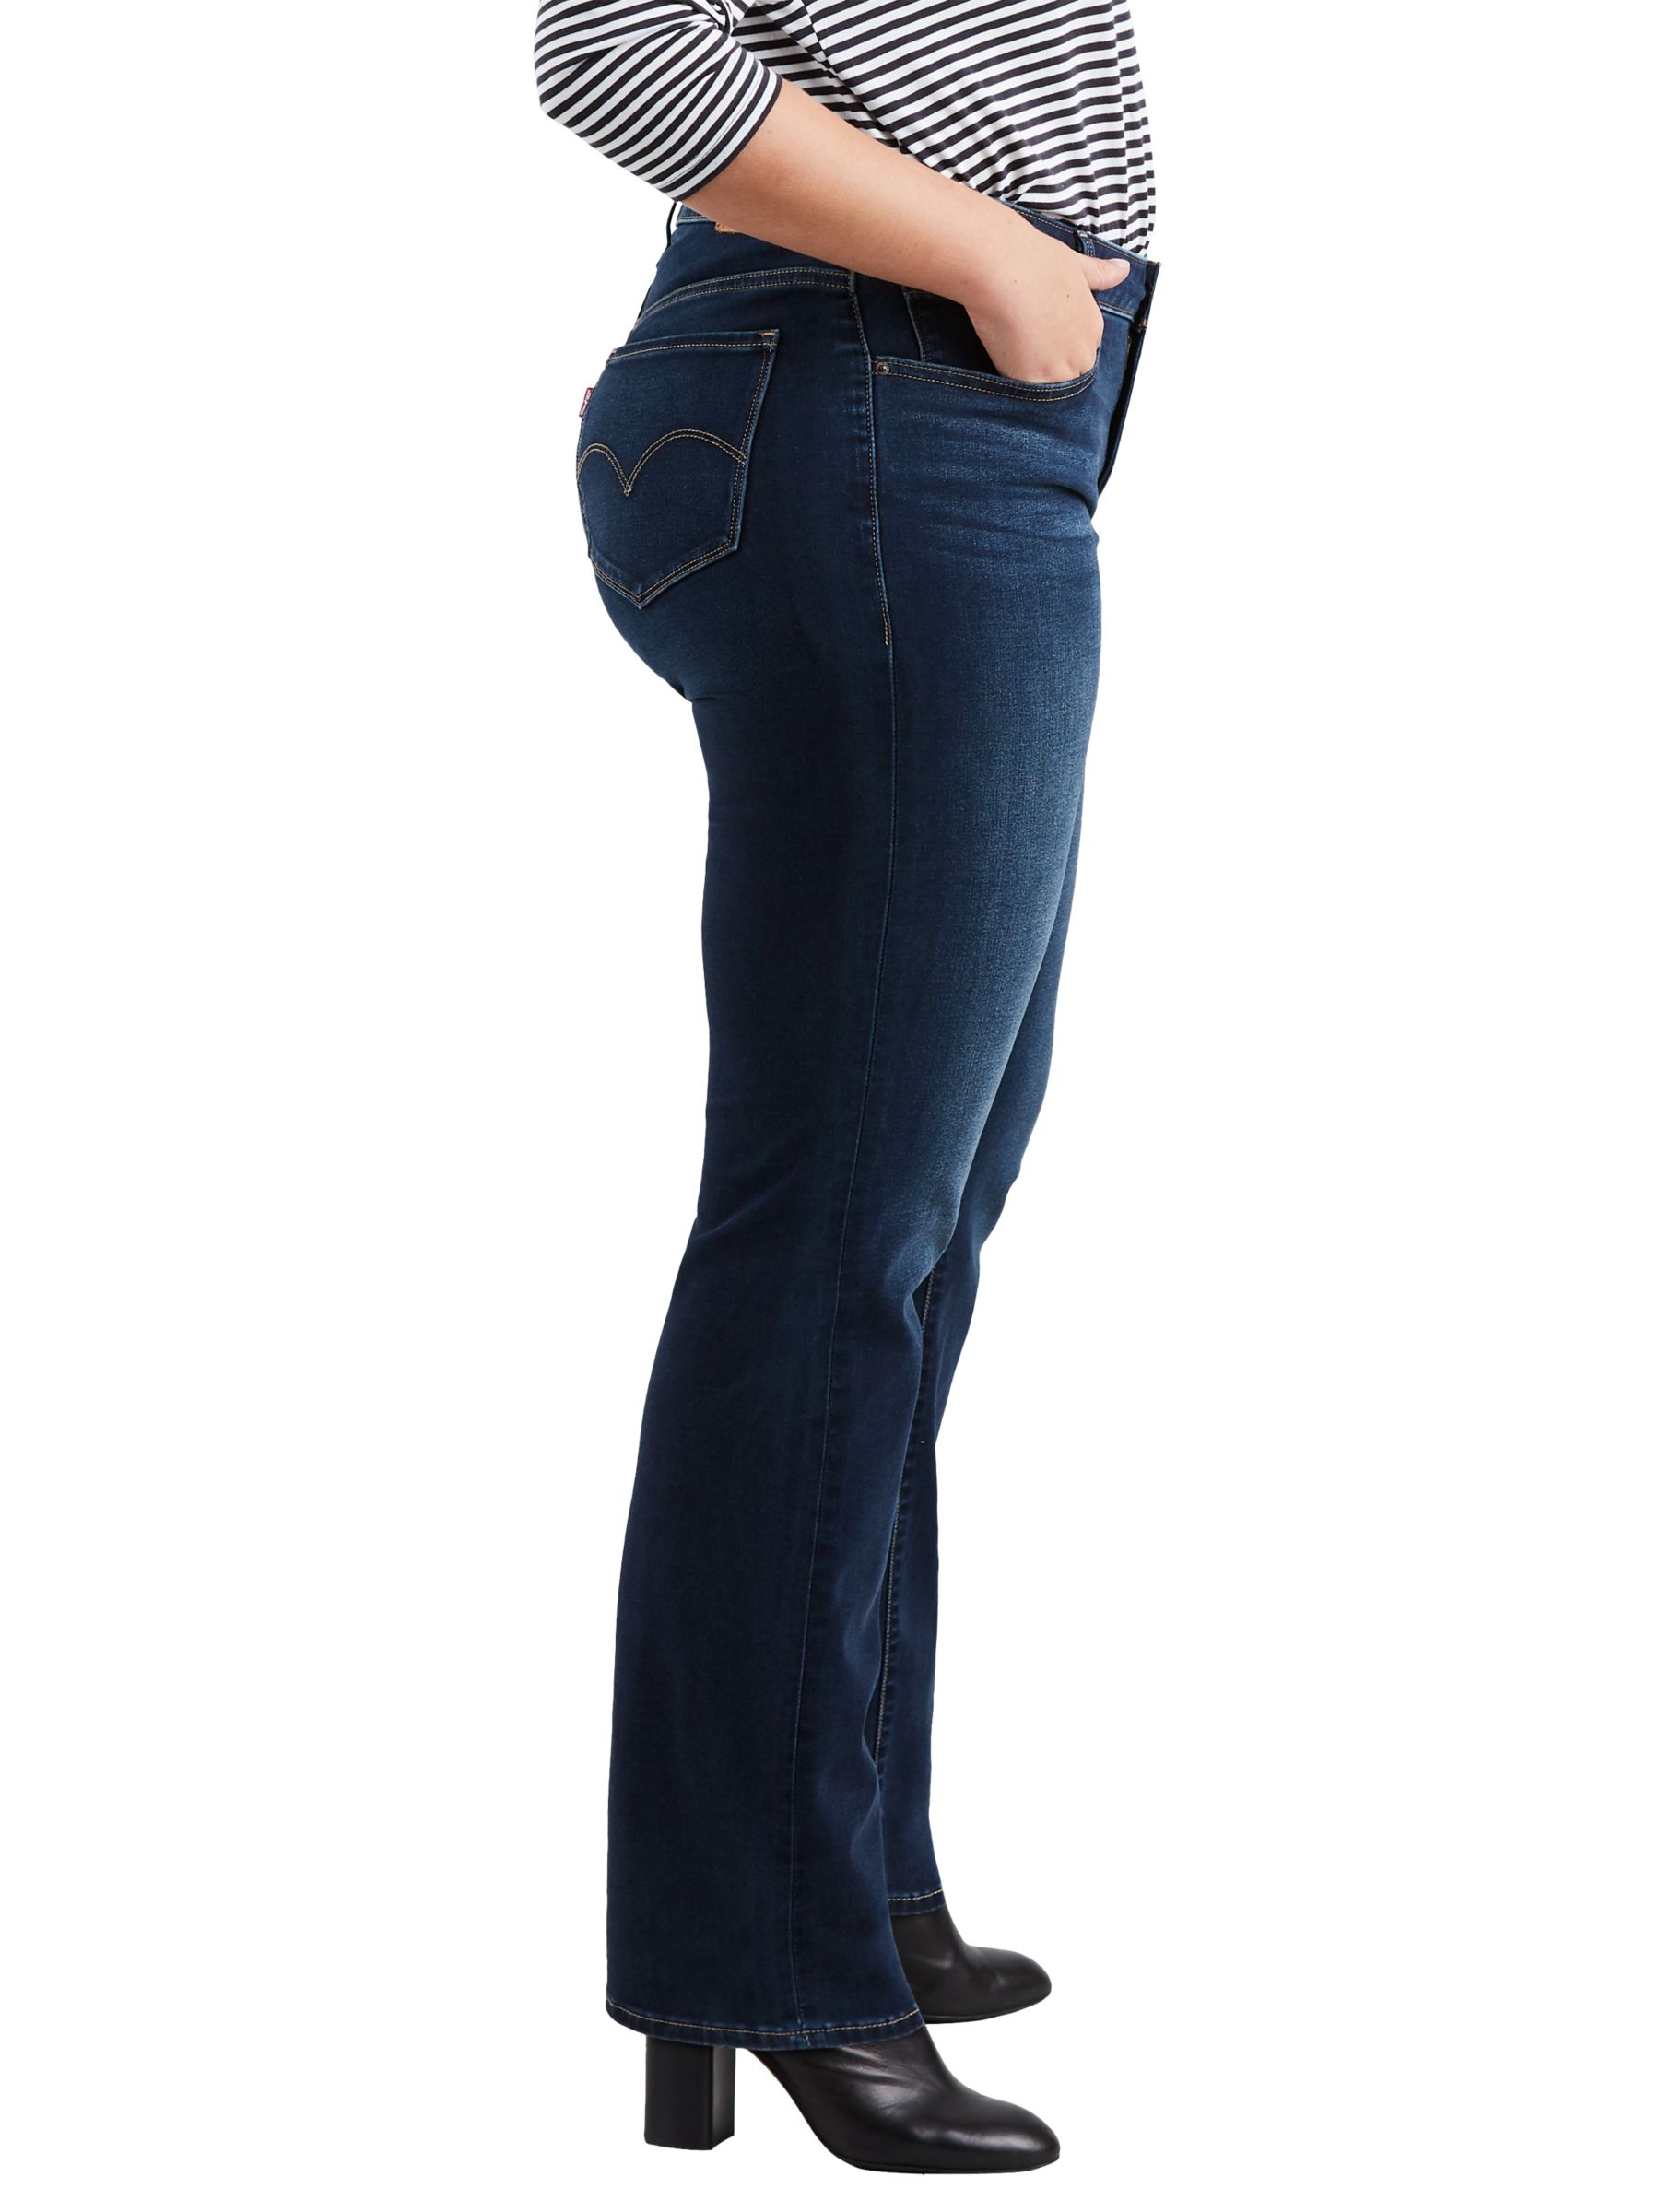 Plus 314 Shaping Straight Jeans, Stand 